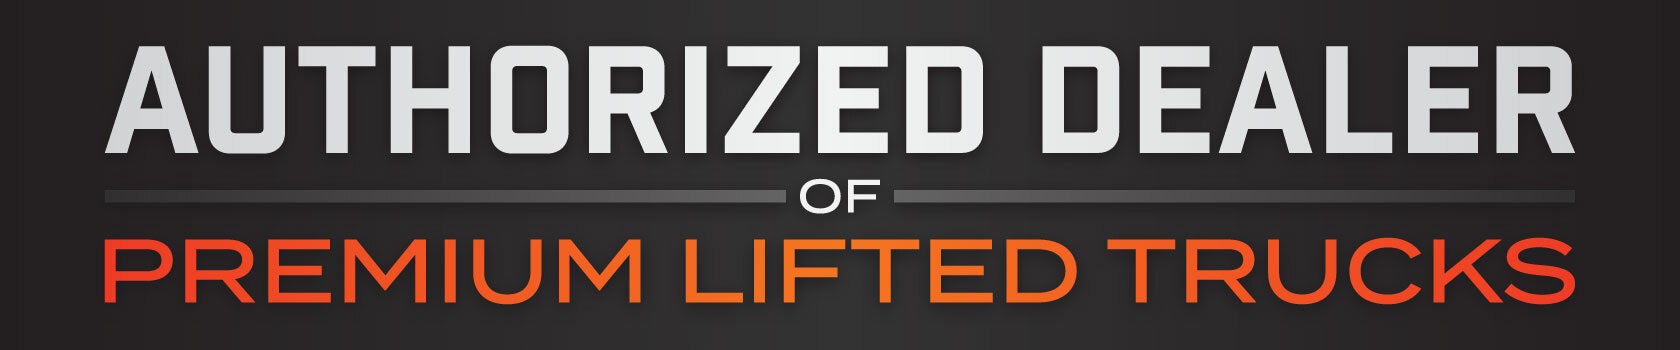 Authorized Dealers of Premium Lifted Trucks